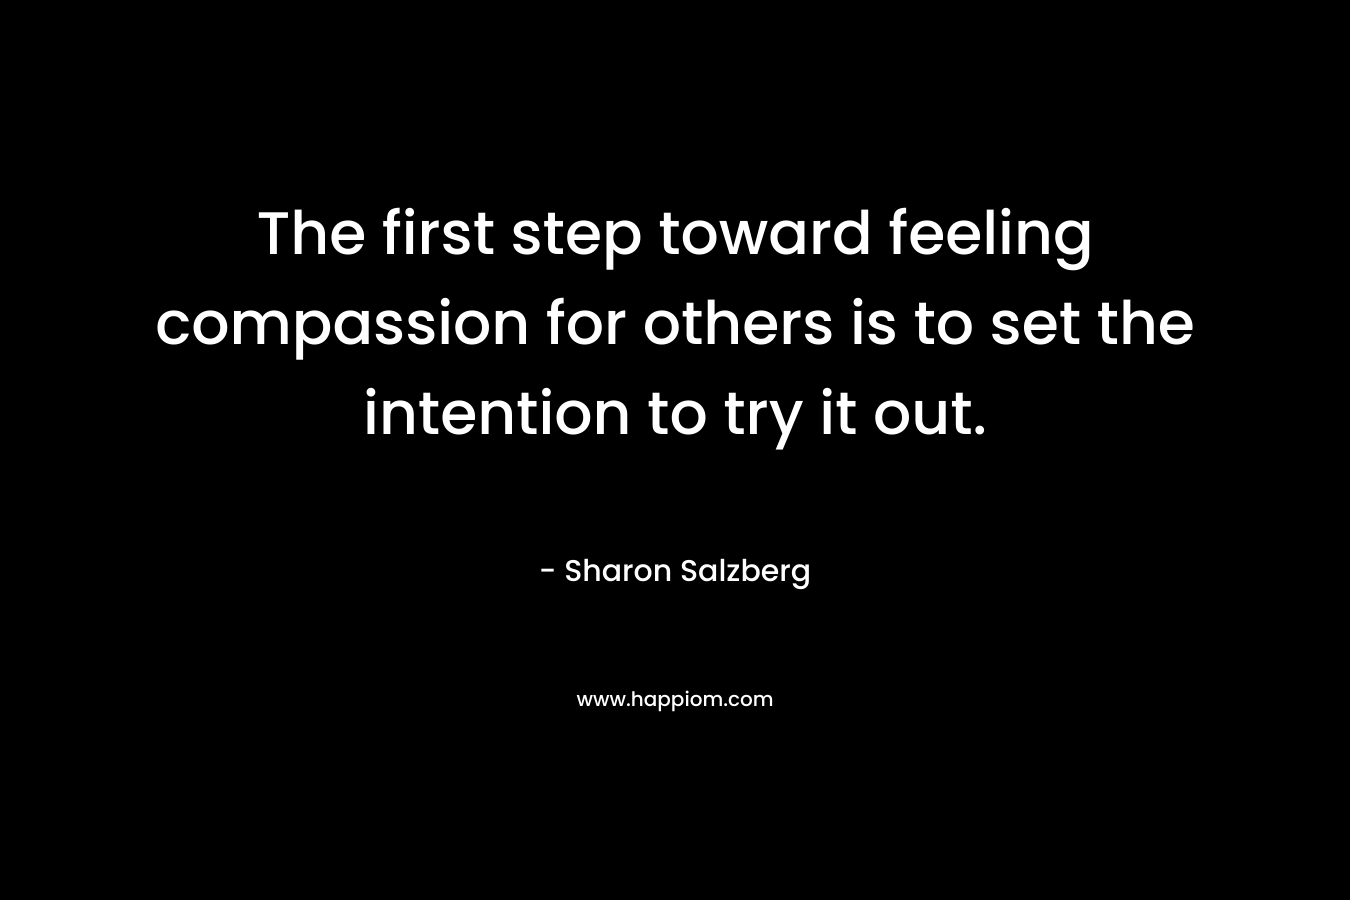 The first step toward feeling compassion for others is to set the intention to try it out.